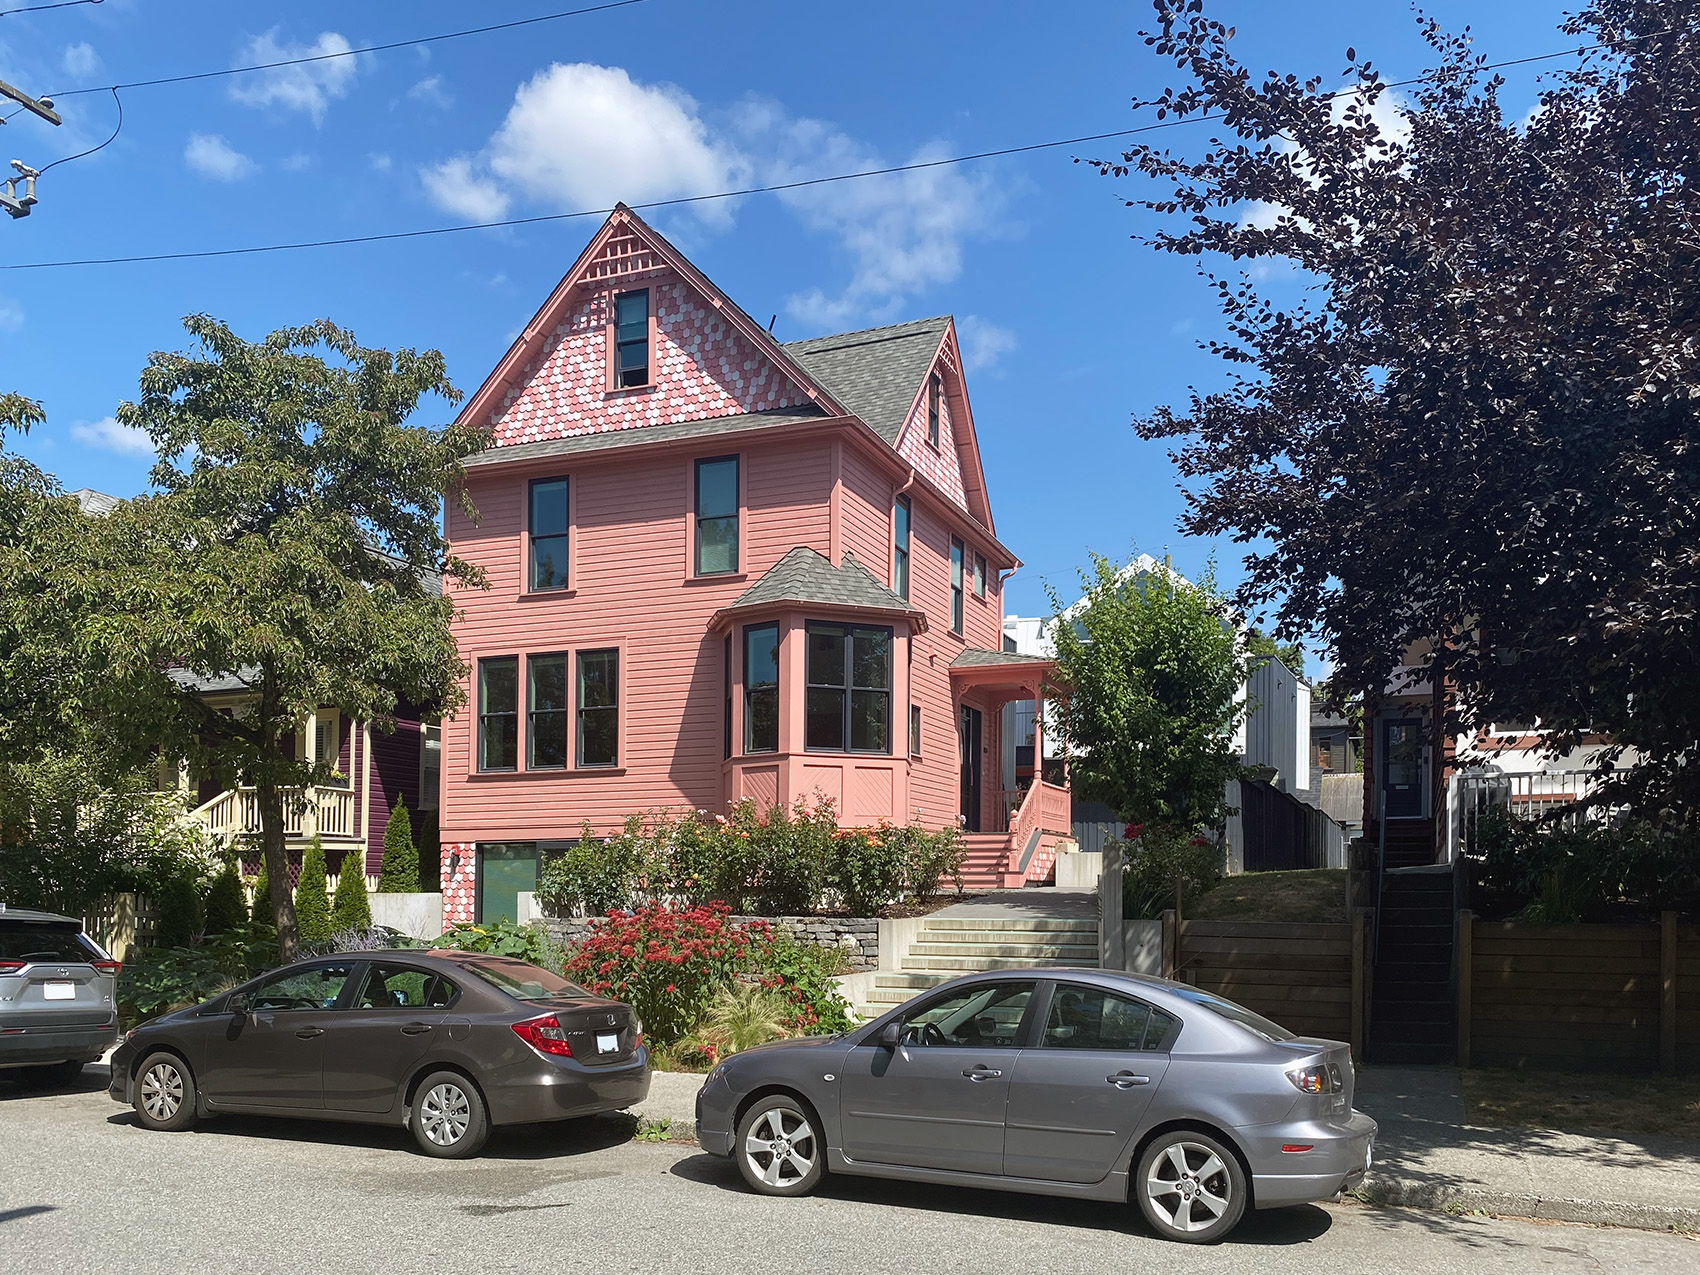 Pink Octopus House, 1900s/2020